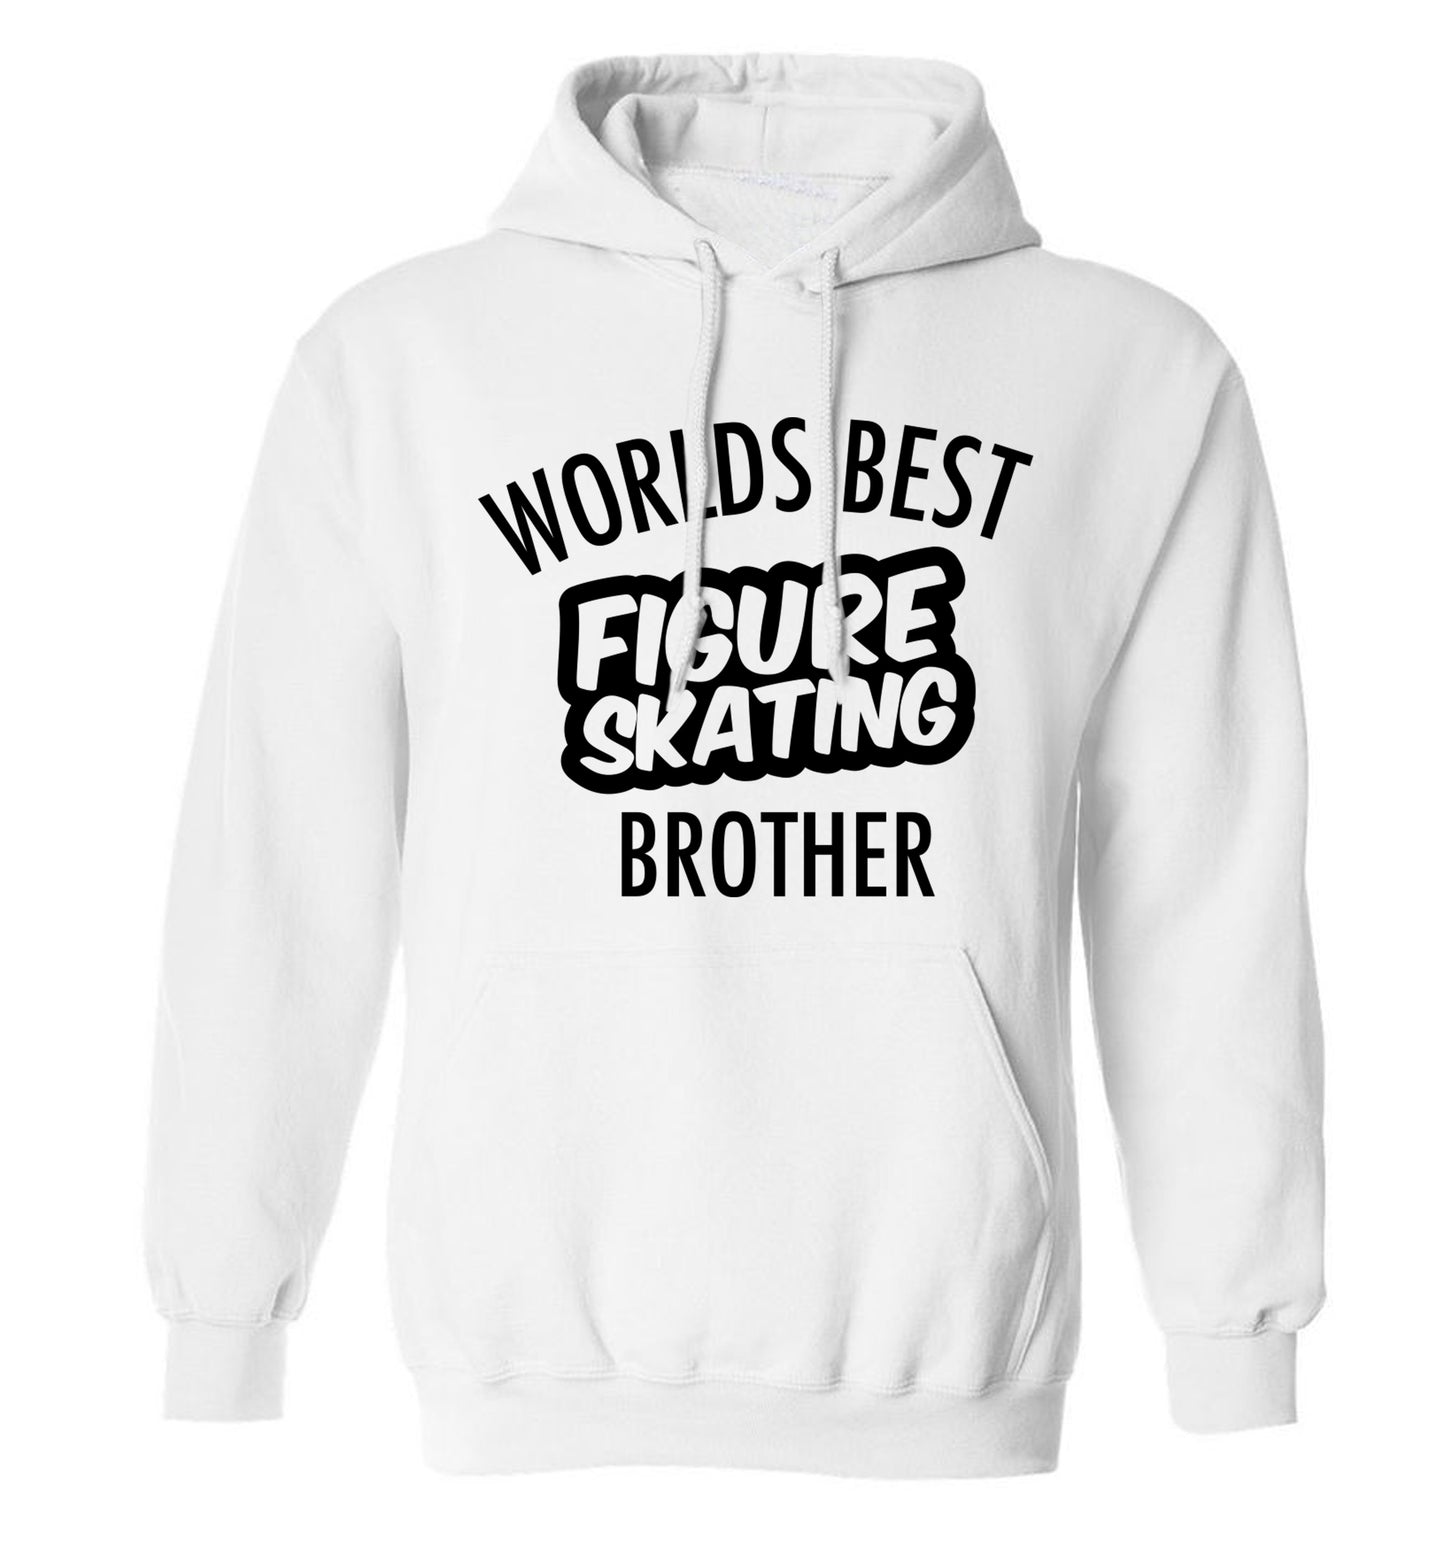 Worlds best figure skating brother adults unisexwhite hoodie 2XL